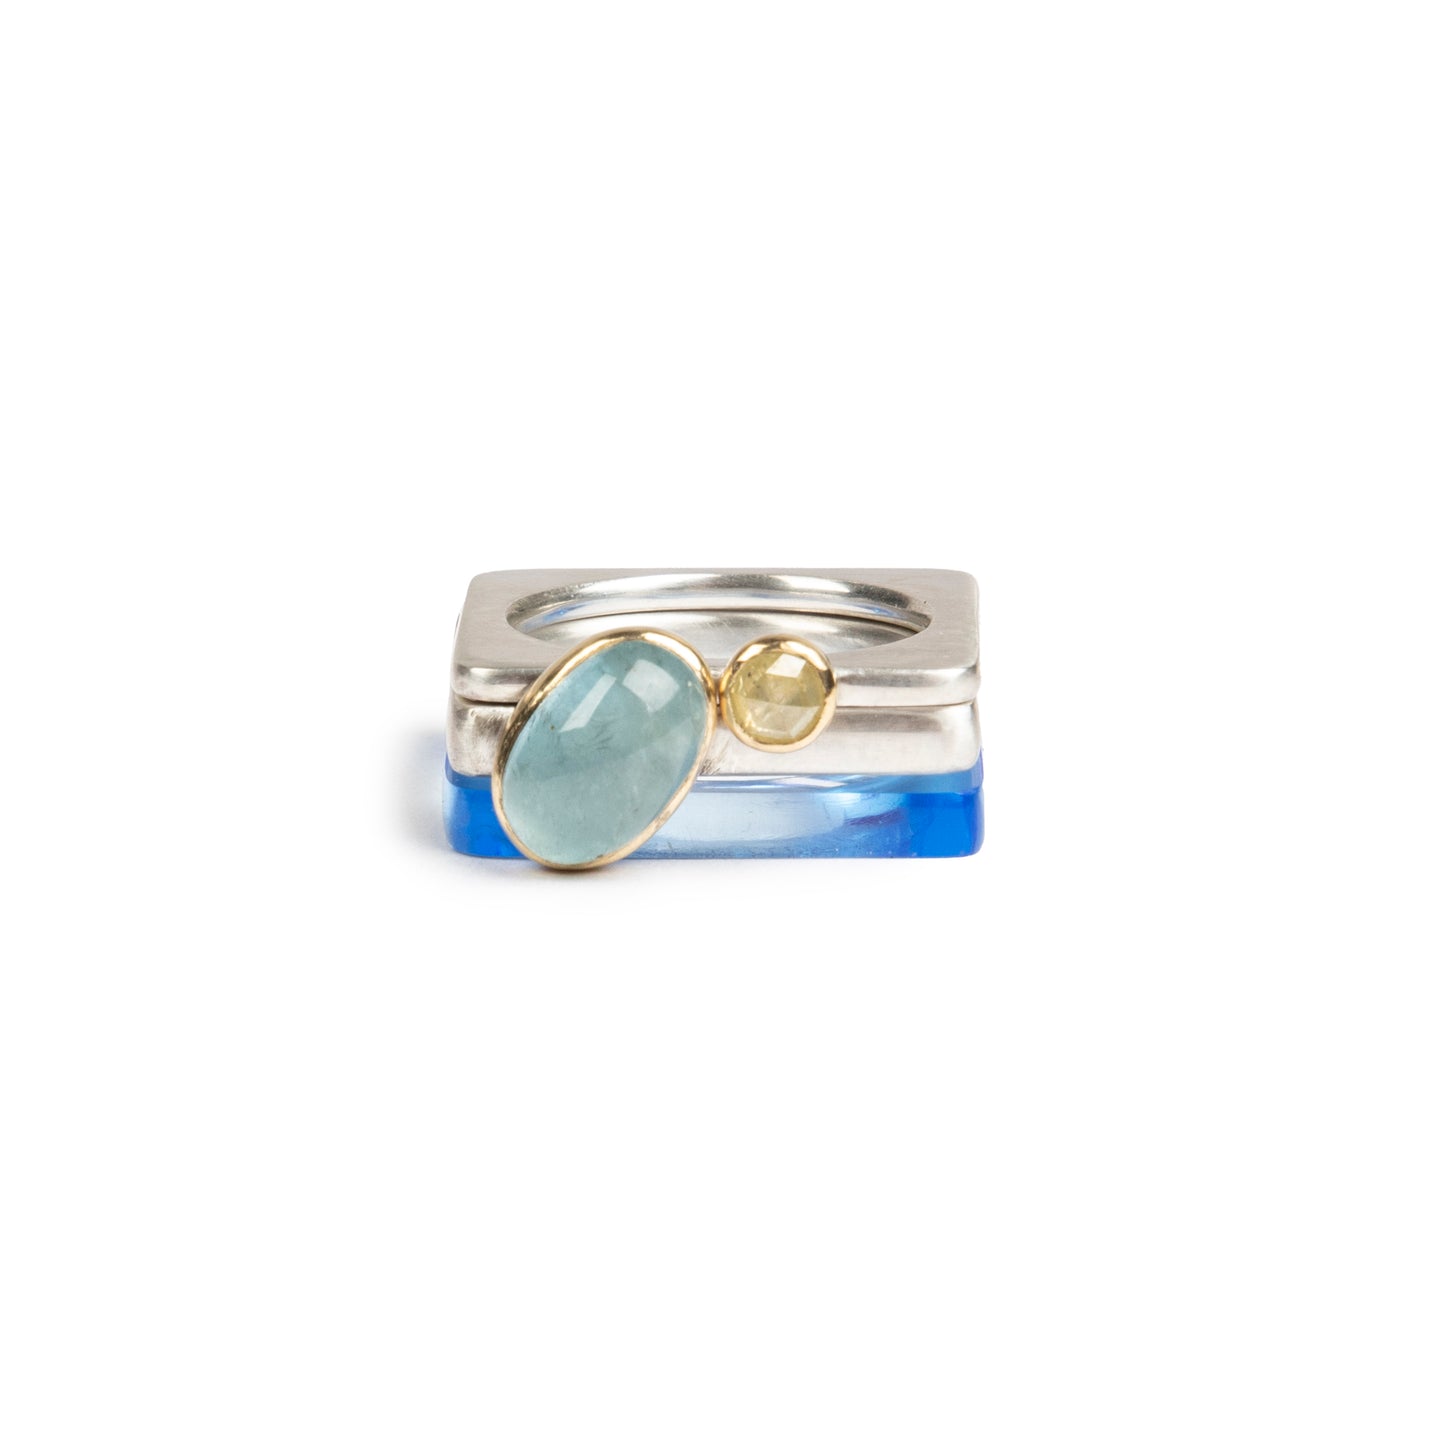 Thick silver ring with oval aquamarine and slim silver ring with diamond. Neptune perspex ring #barbaraspencejewellery